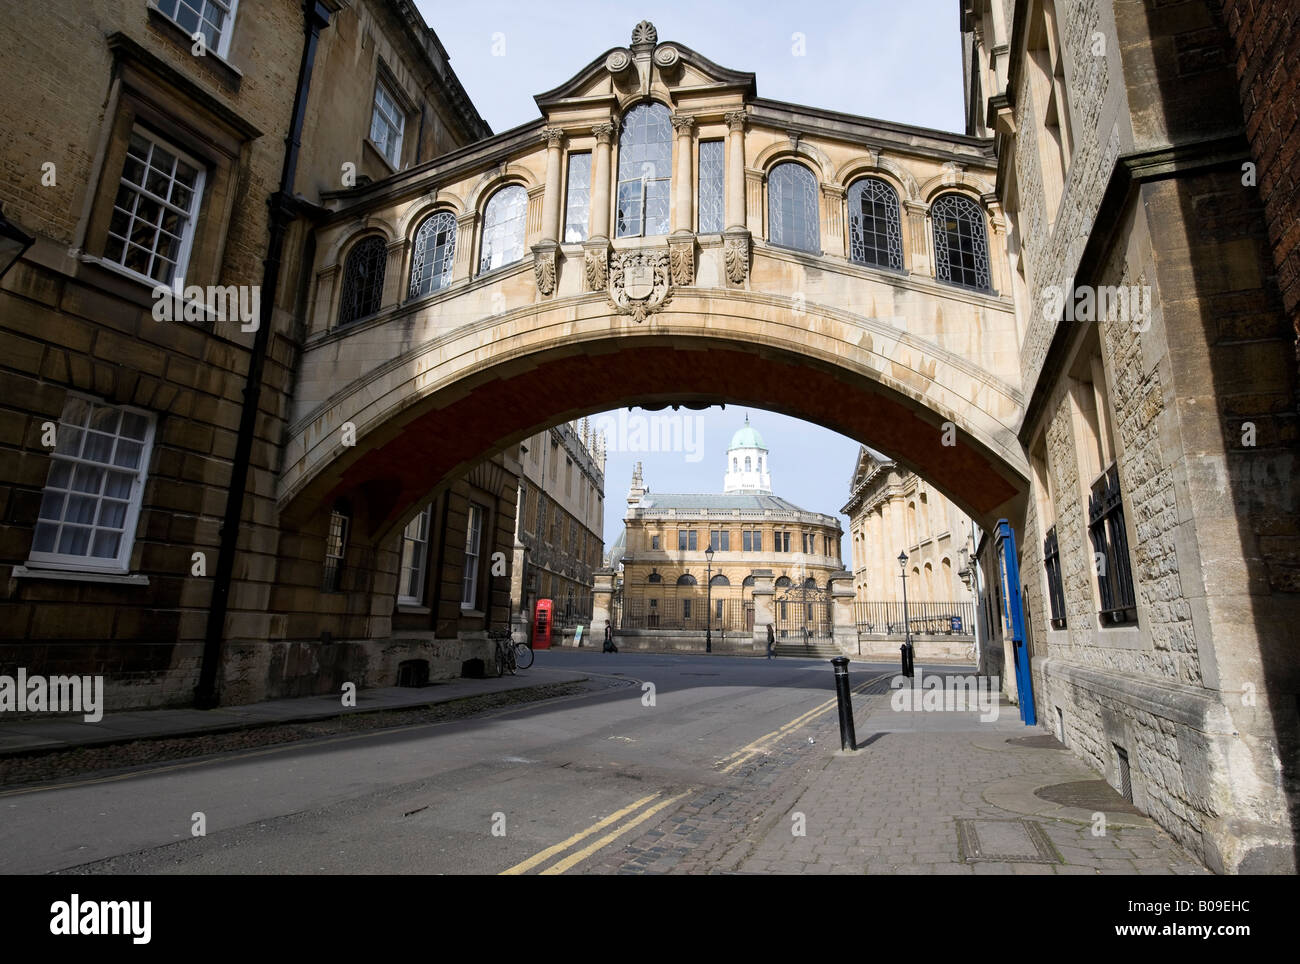 Hertford College 'Bridge of Sighs' which links the Colleges Old and New Quads with The Sheldonian Theatre in the background Stock Photo